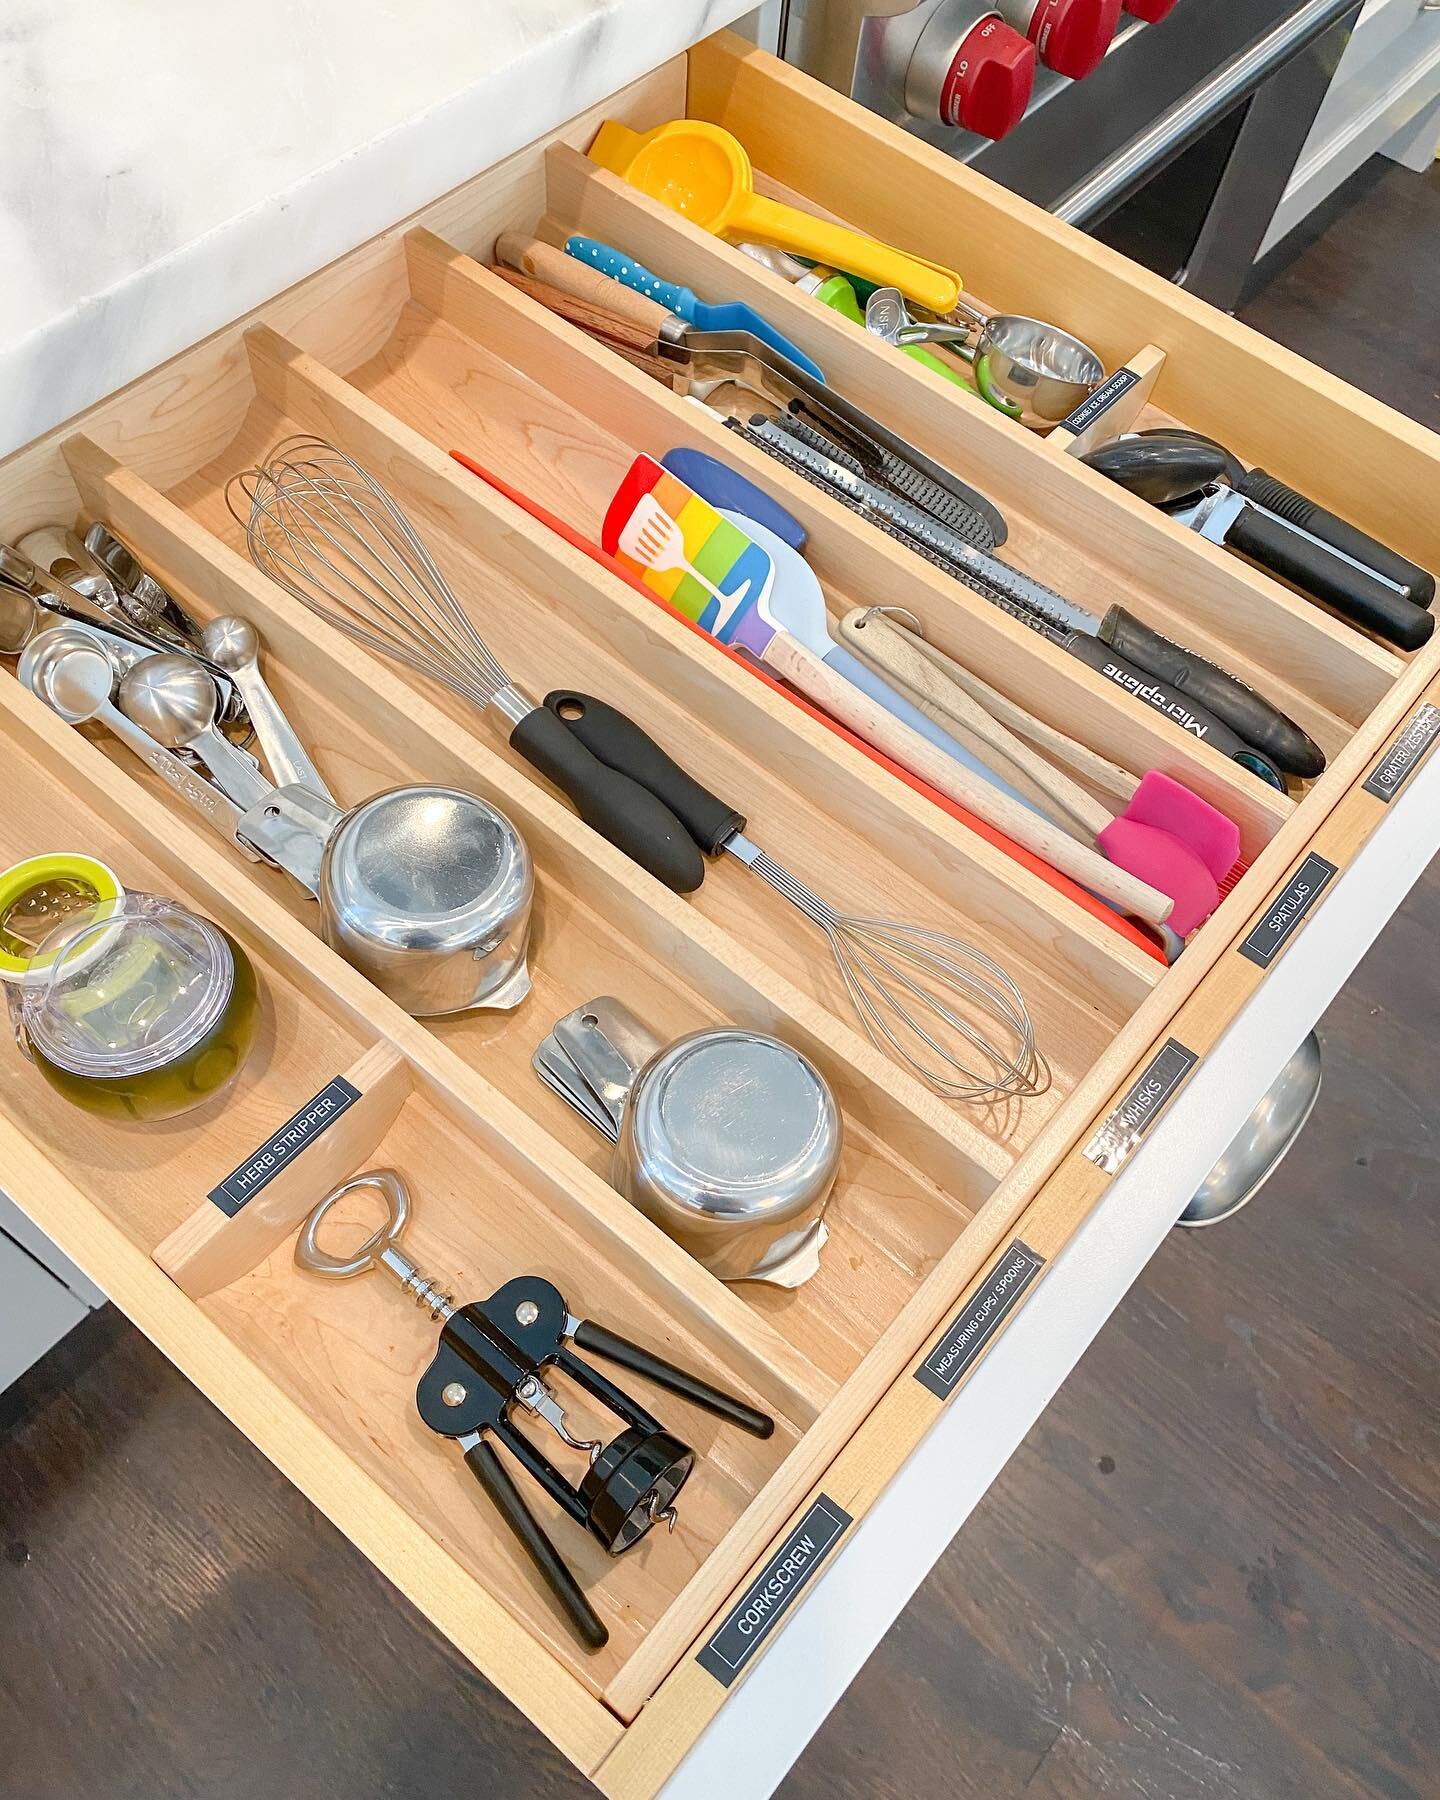 &lsquo;Tis the season to organize your kitchen drawers!⁣
⁣
There&rsquo;s nothing better than knowing exactly where everything when cooking a big holiday meal. ⁣
⁣
Use this as a reminder to take a few minutes to tidy up the essentials before hosting n